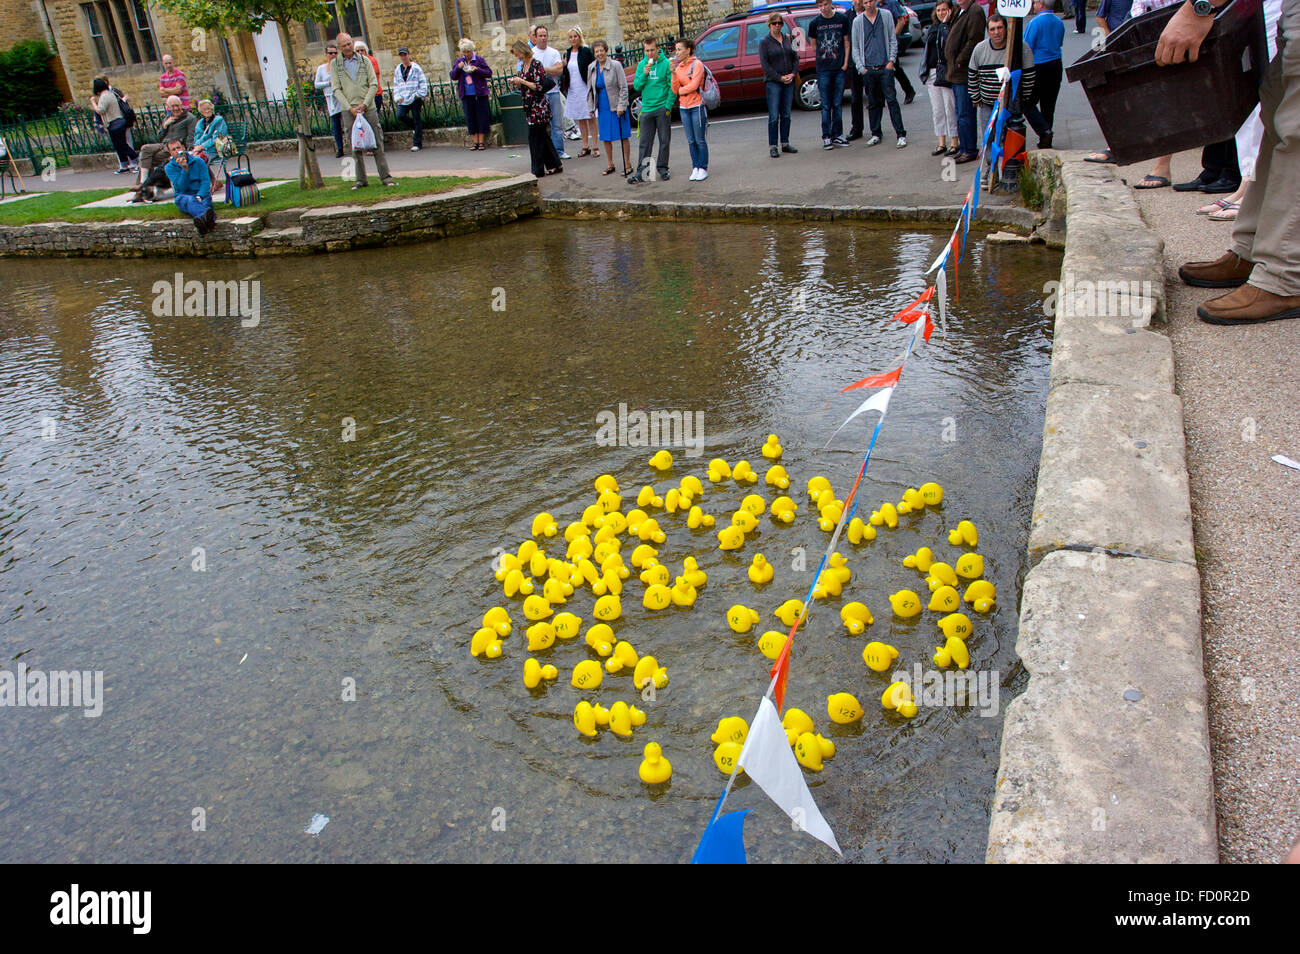 Duck racing on  river at bourton-on-the-water Cotswold Village, Gloucestershire, England Stock Photo